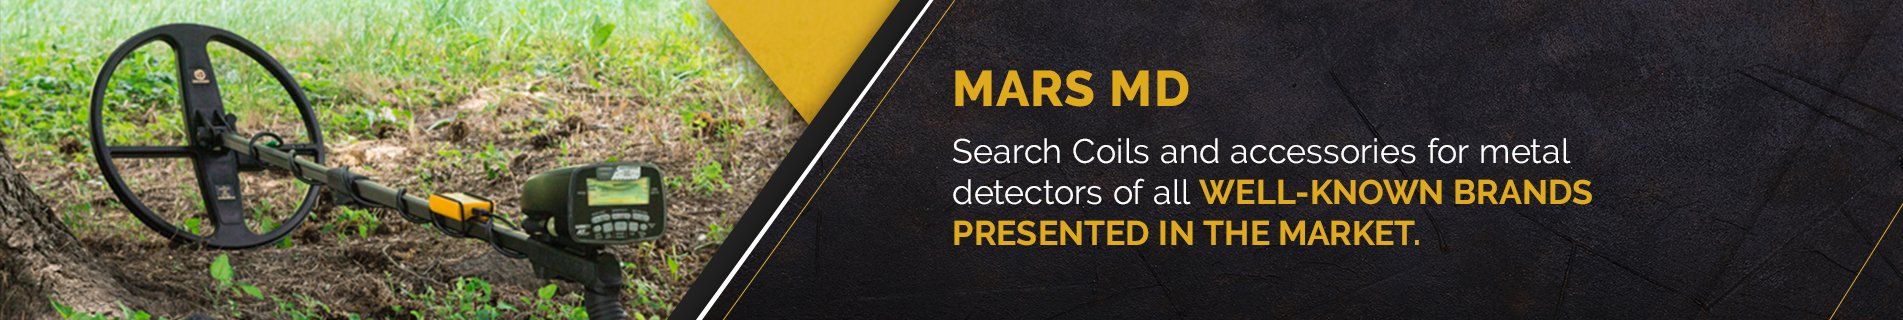 Mars MD Search Coils